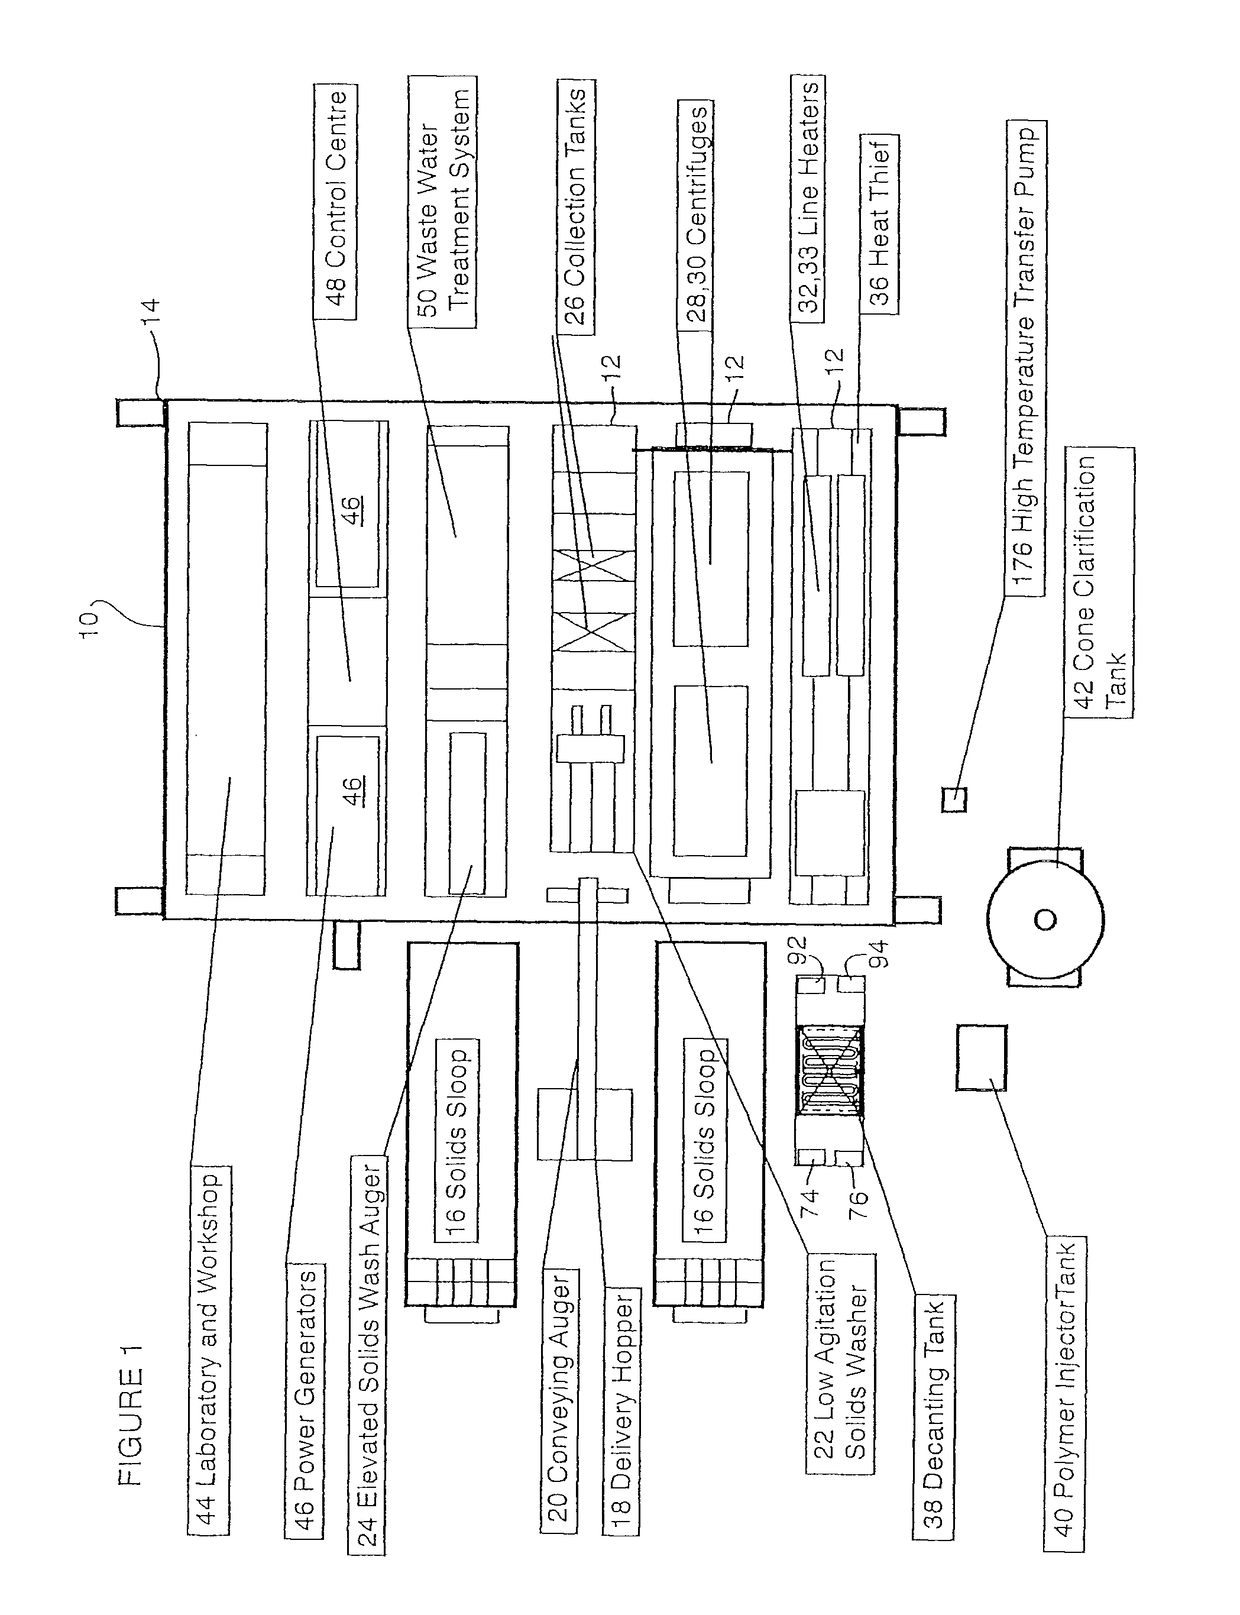 Hydrocarbons environmental processing system method and apparatus